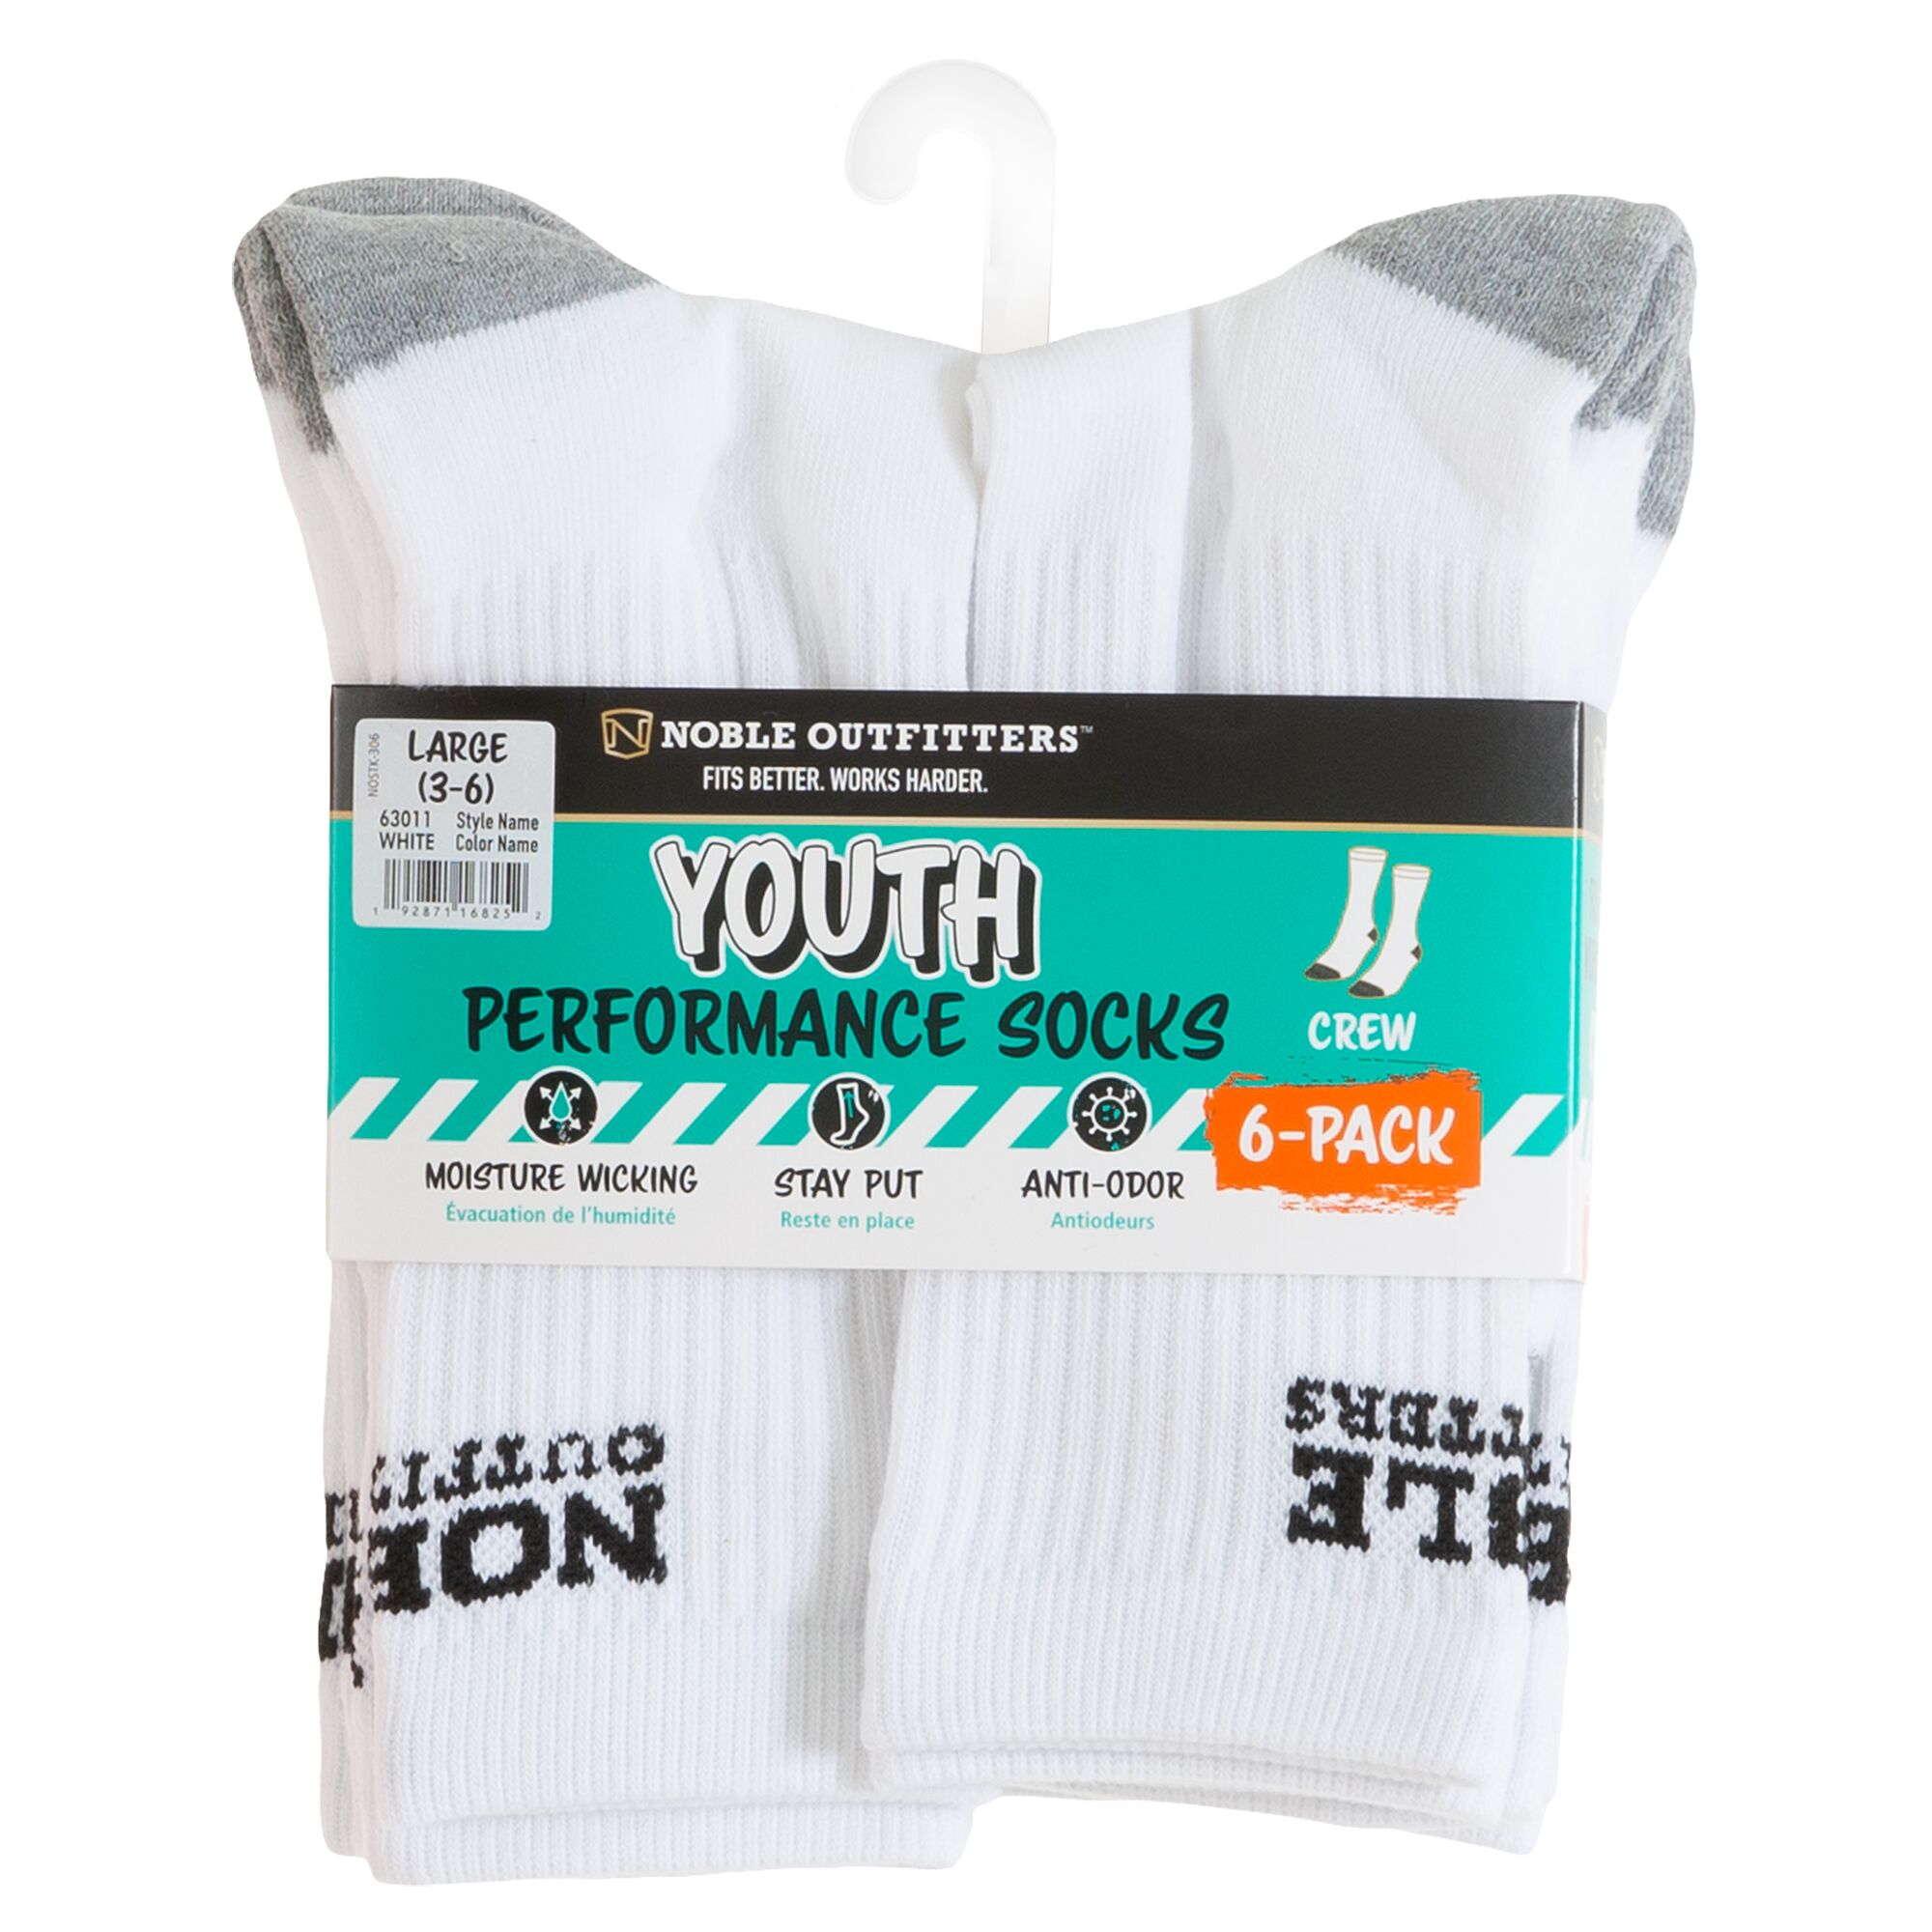 Youth Performance Crew Sock 6-Pack in White